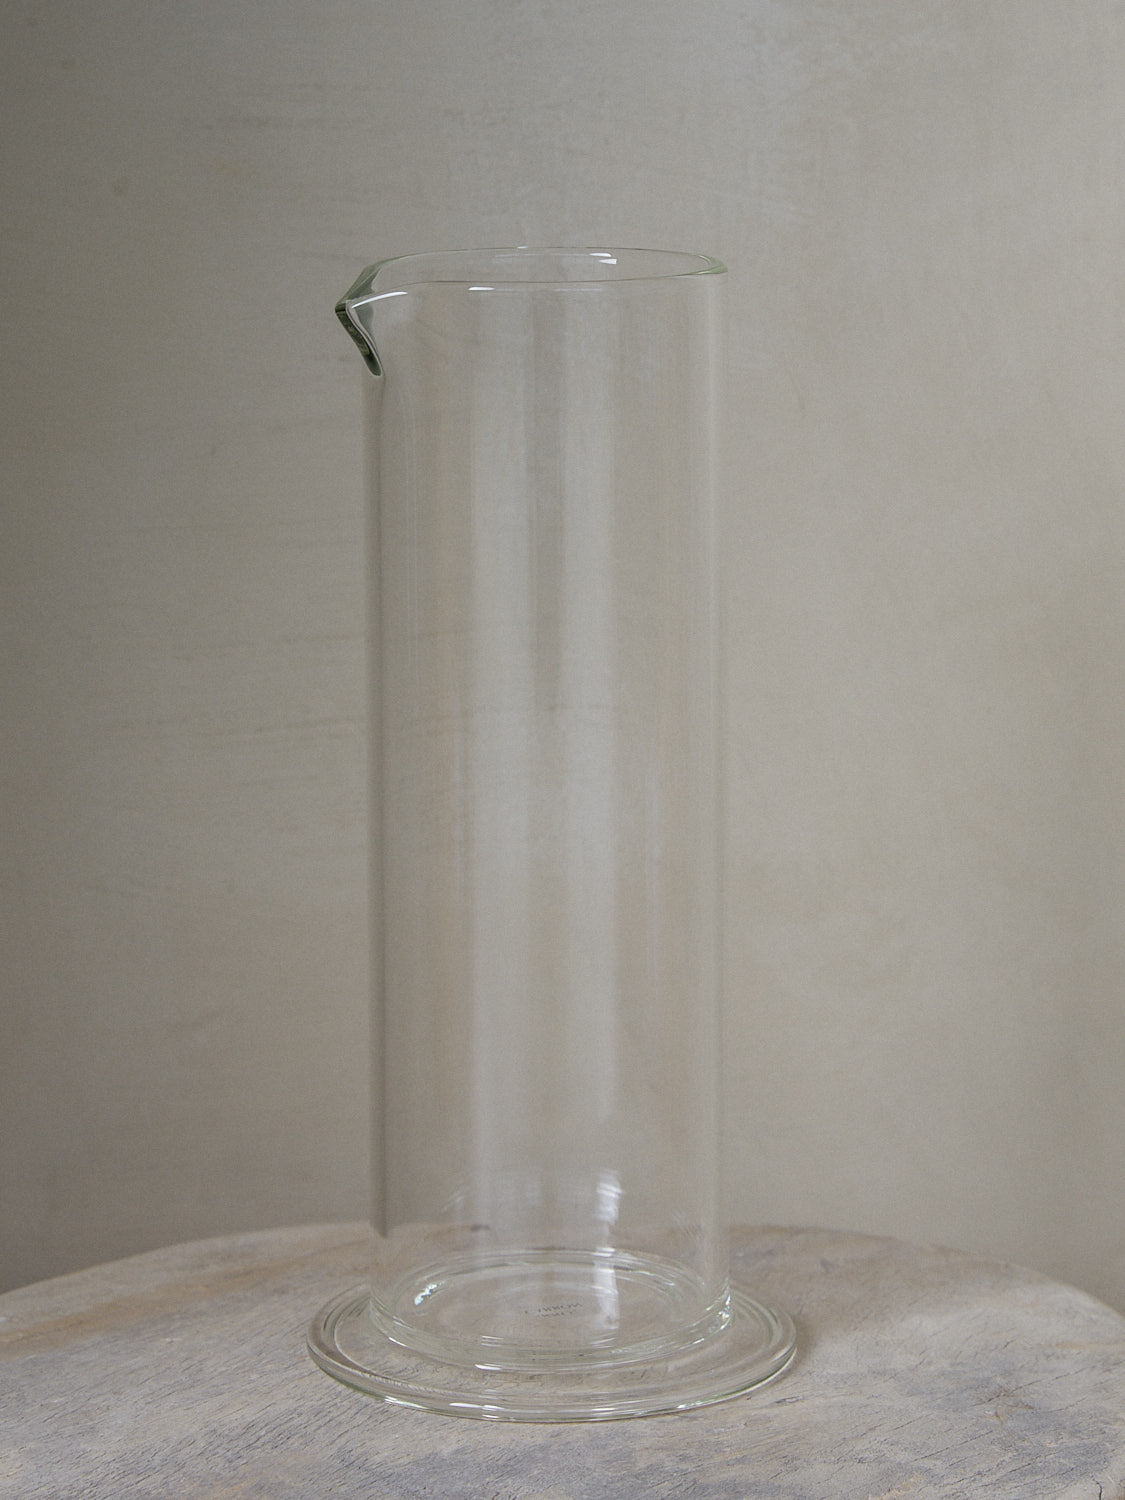 Paris Carafe. Casually elegant tall water carafe designed by Mathilde Carron-Astier de Villatte and individually mouth blown in borosilicate glass. 